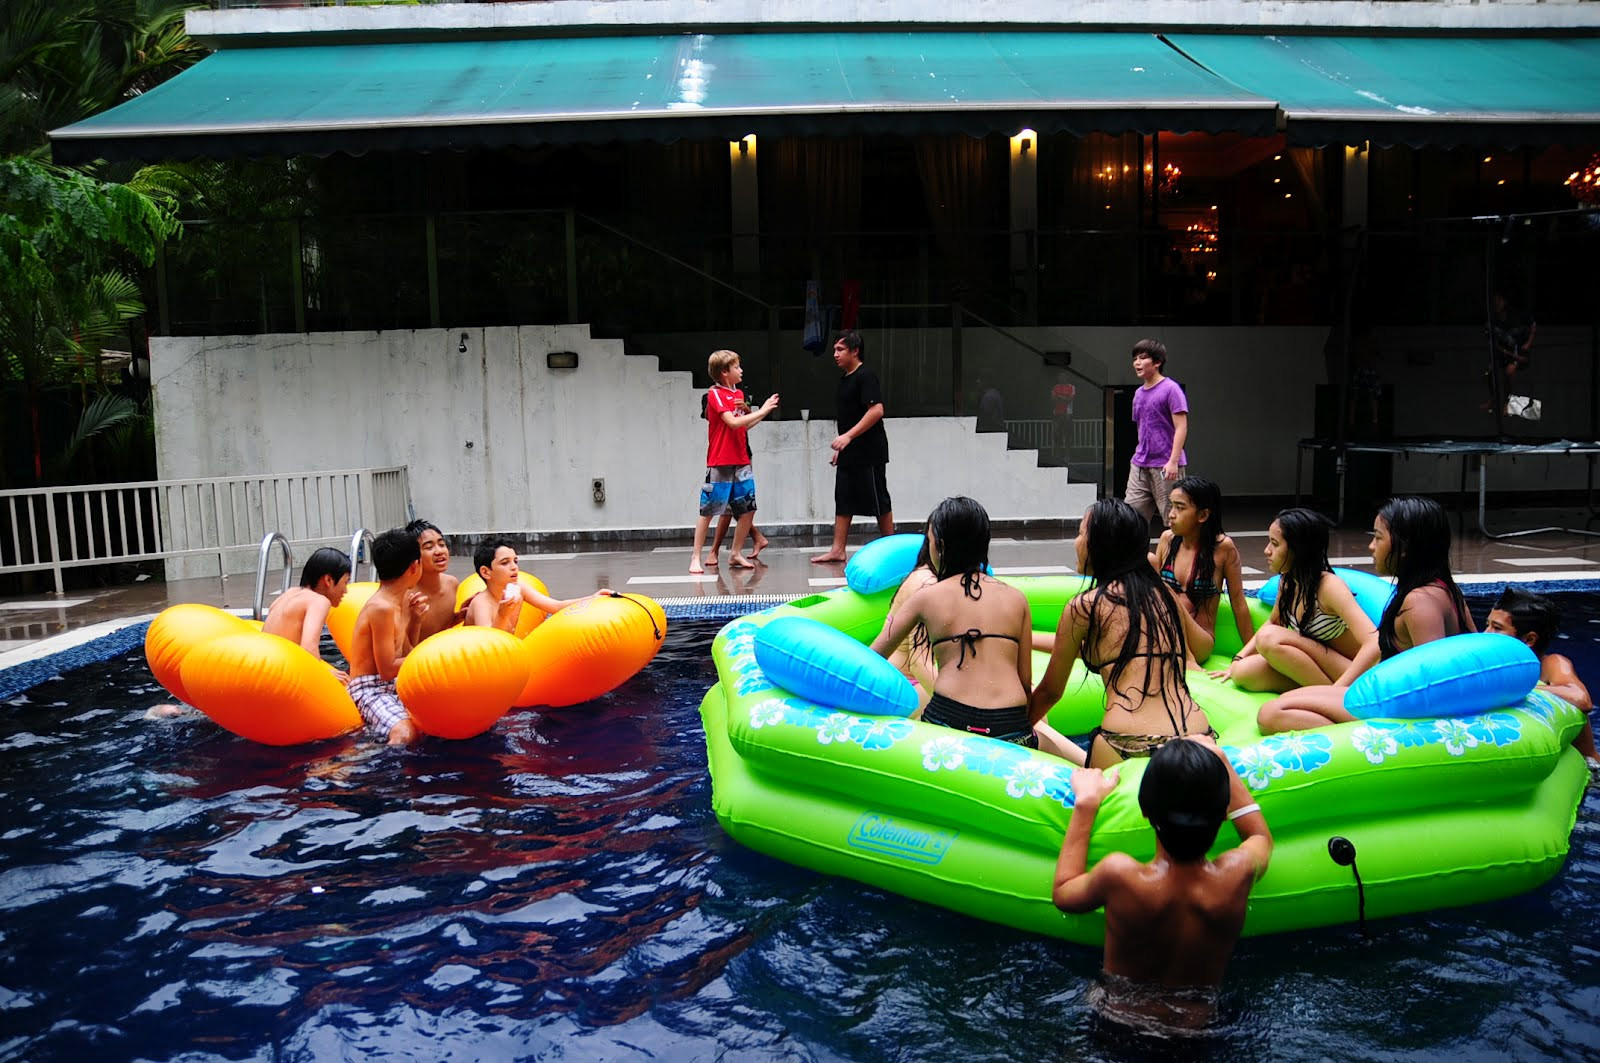 Teen Pool Party Ideas
 Event DirecTus Pool Party FUN for KIDS TEENS & ADULTS